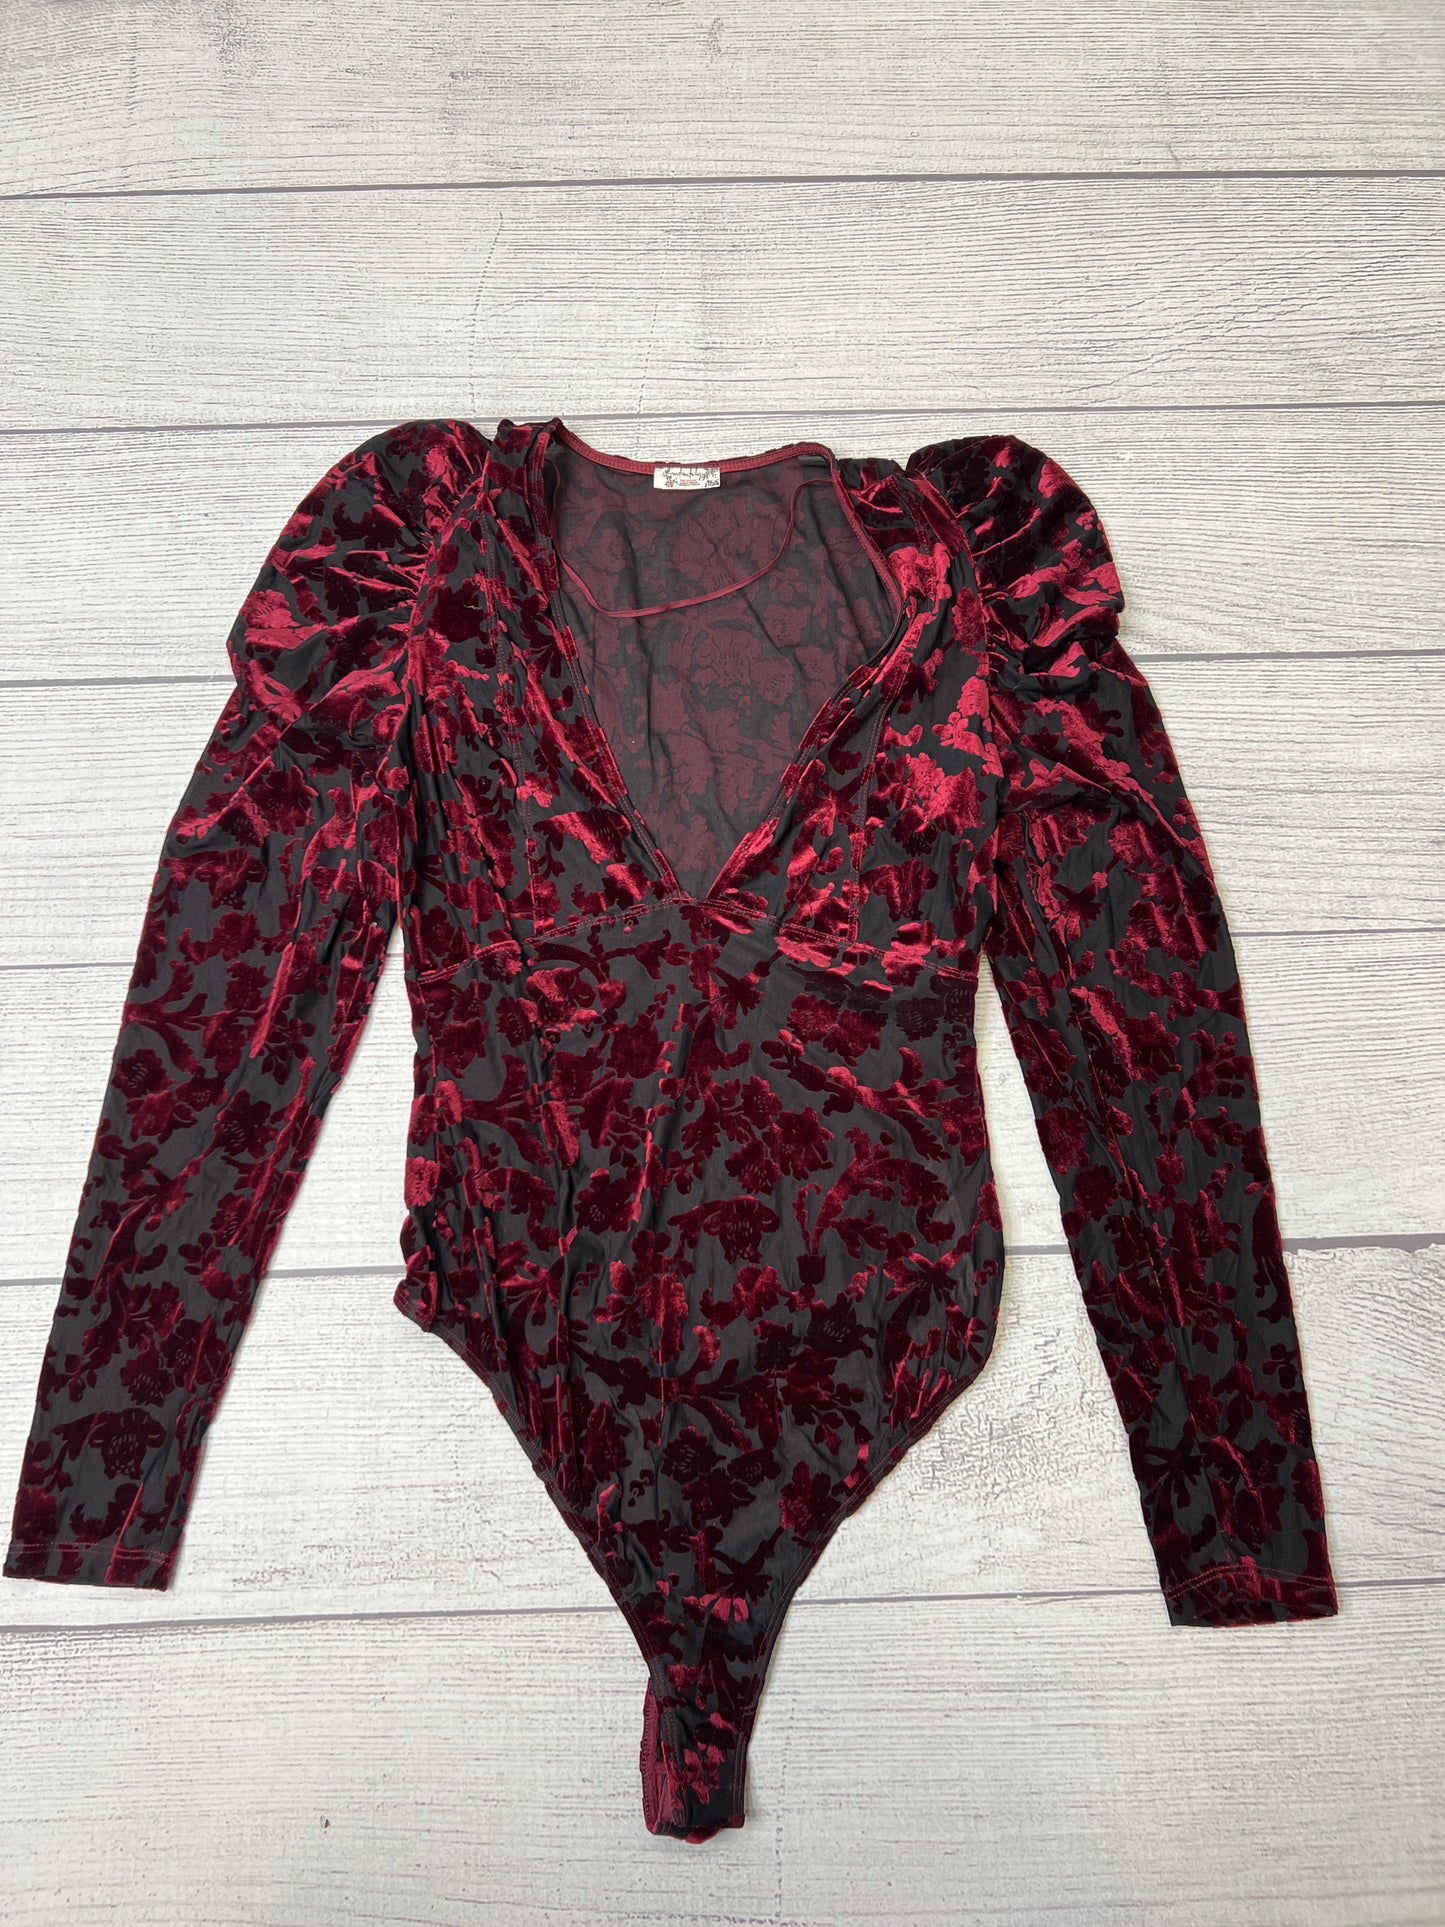 Red Black Top Long Sleeve Free People, Size M